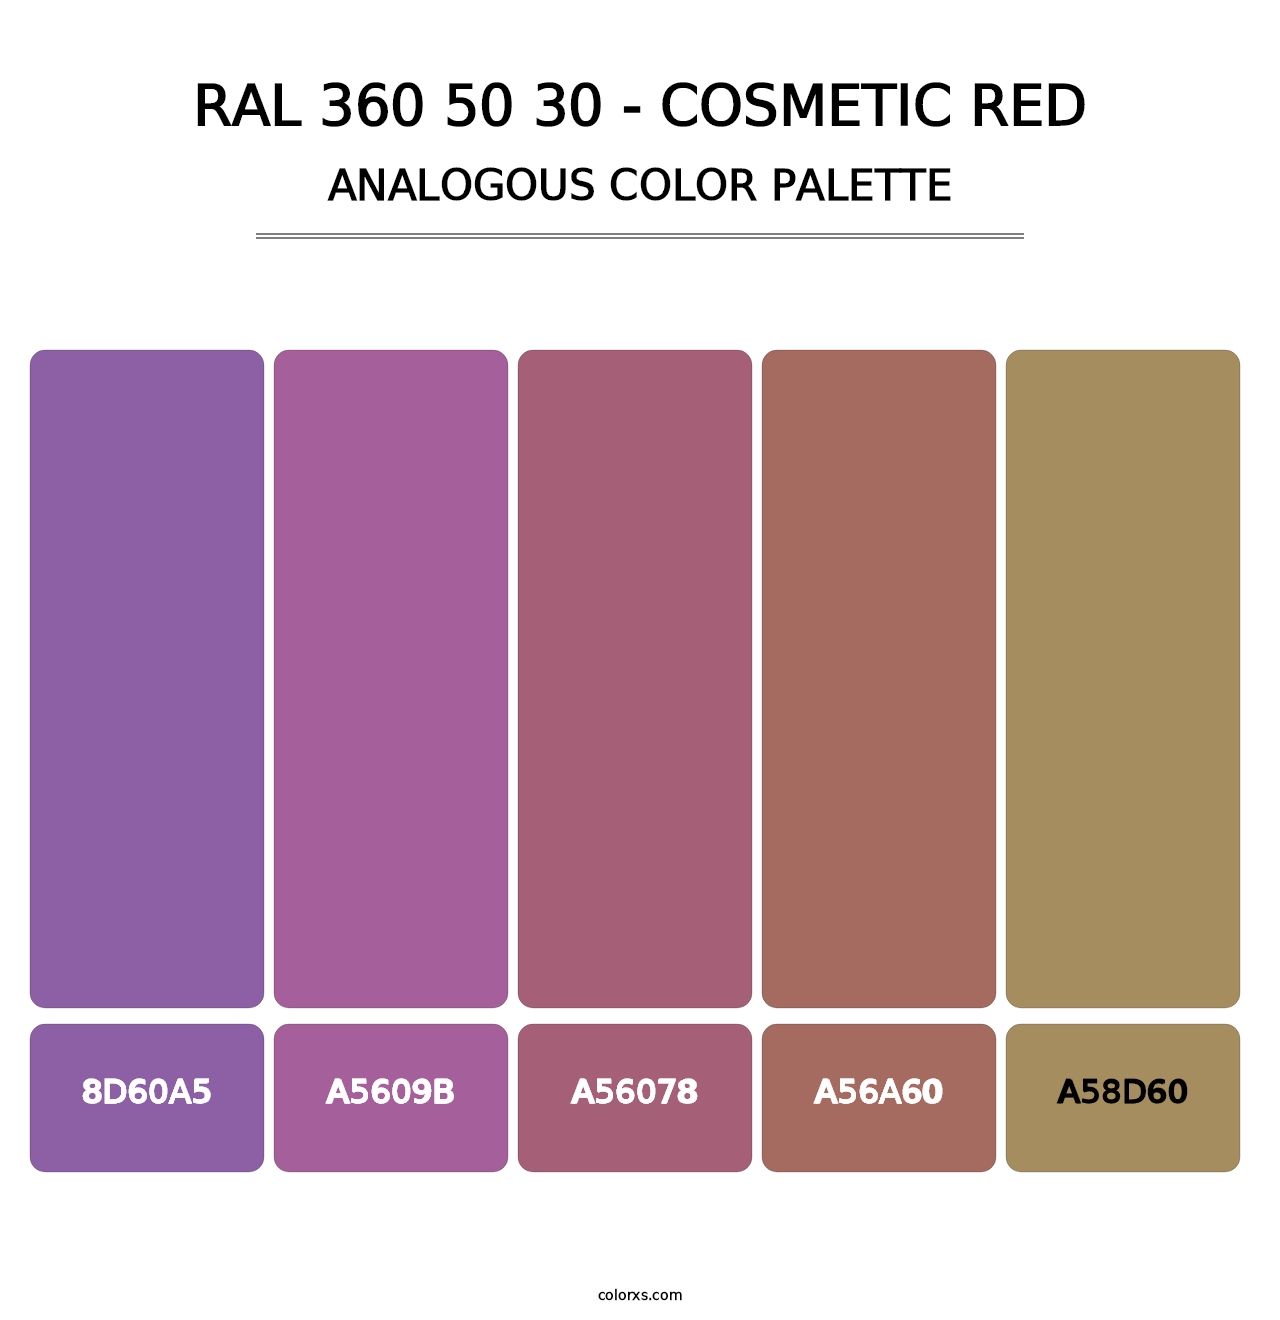 RAL 360 50 30 - Cosmetic Red - Analogous Color Palette